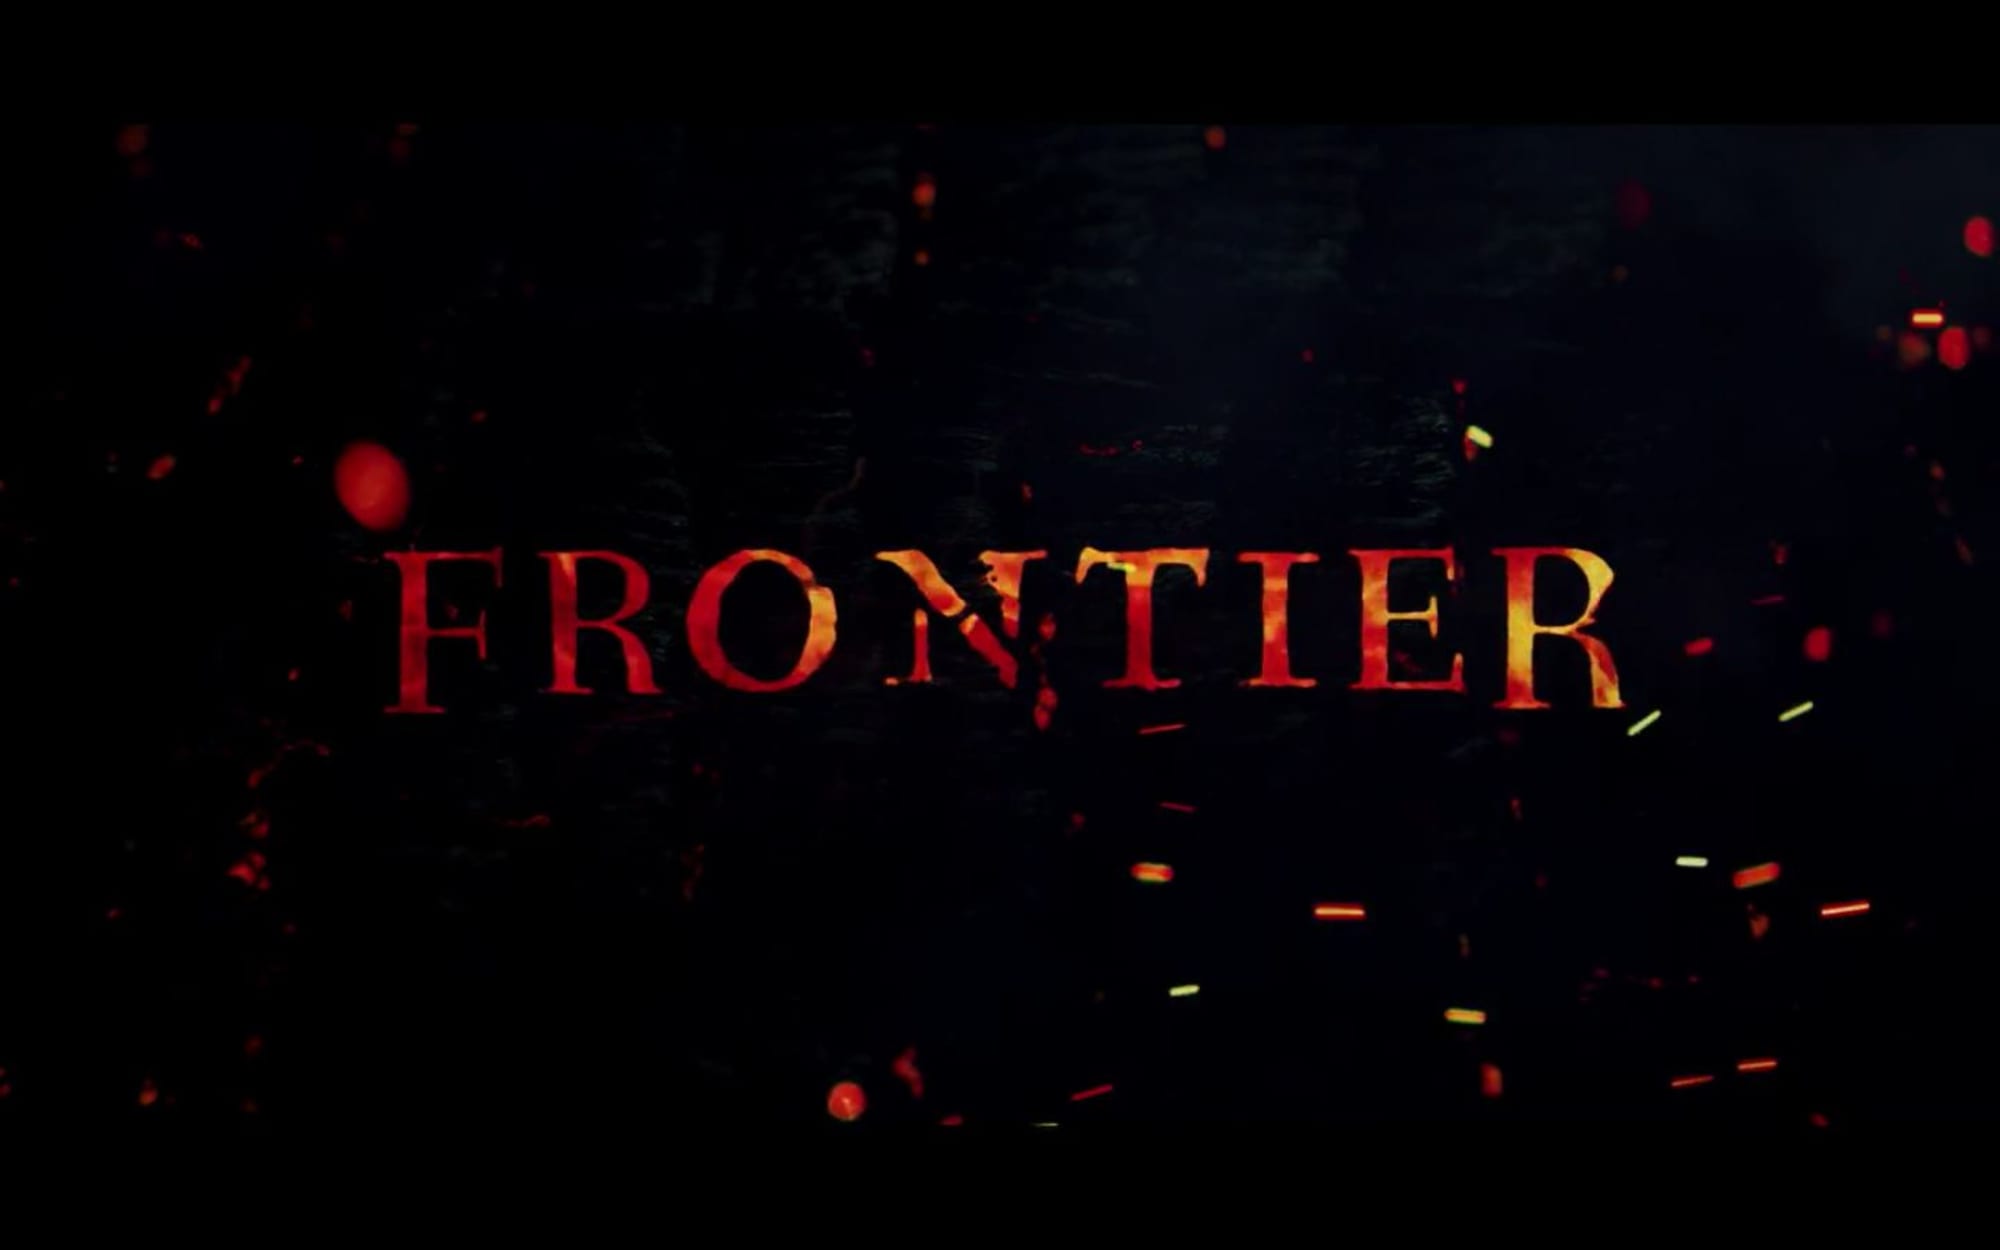 25 Reasons You Should Watch Frontier Starring Jason Momoa - Page 22